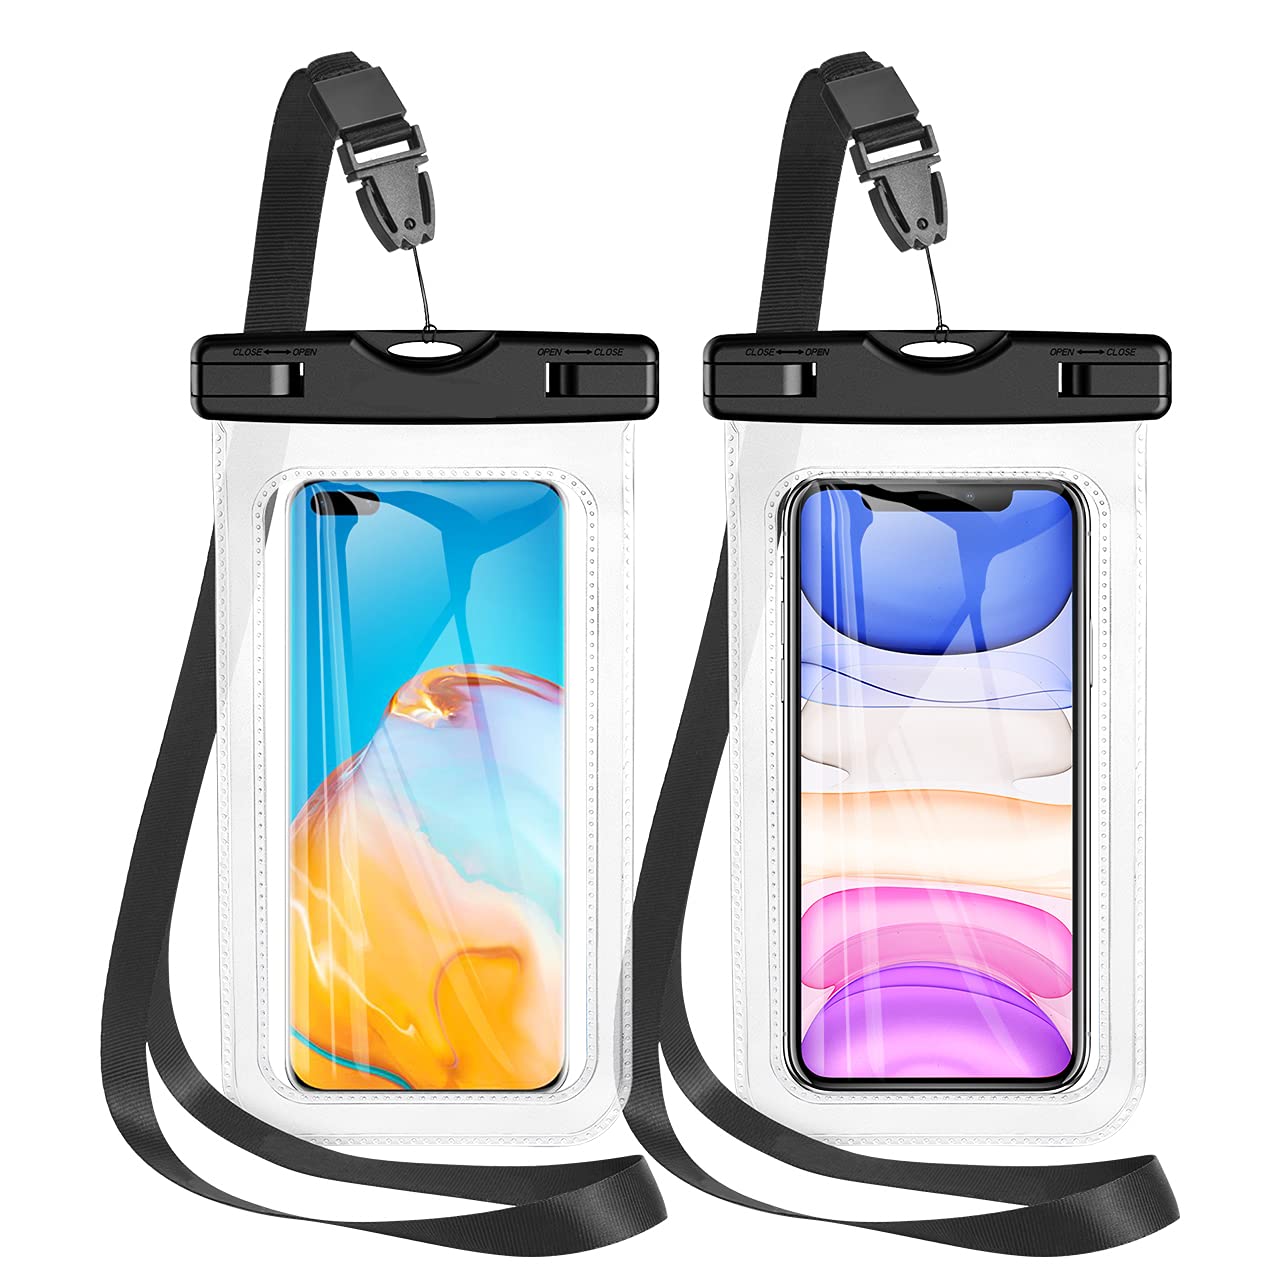 Ensuring Reliability: Testing Waterproof Pouches For Phones